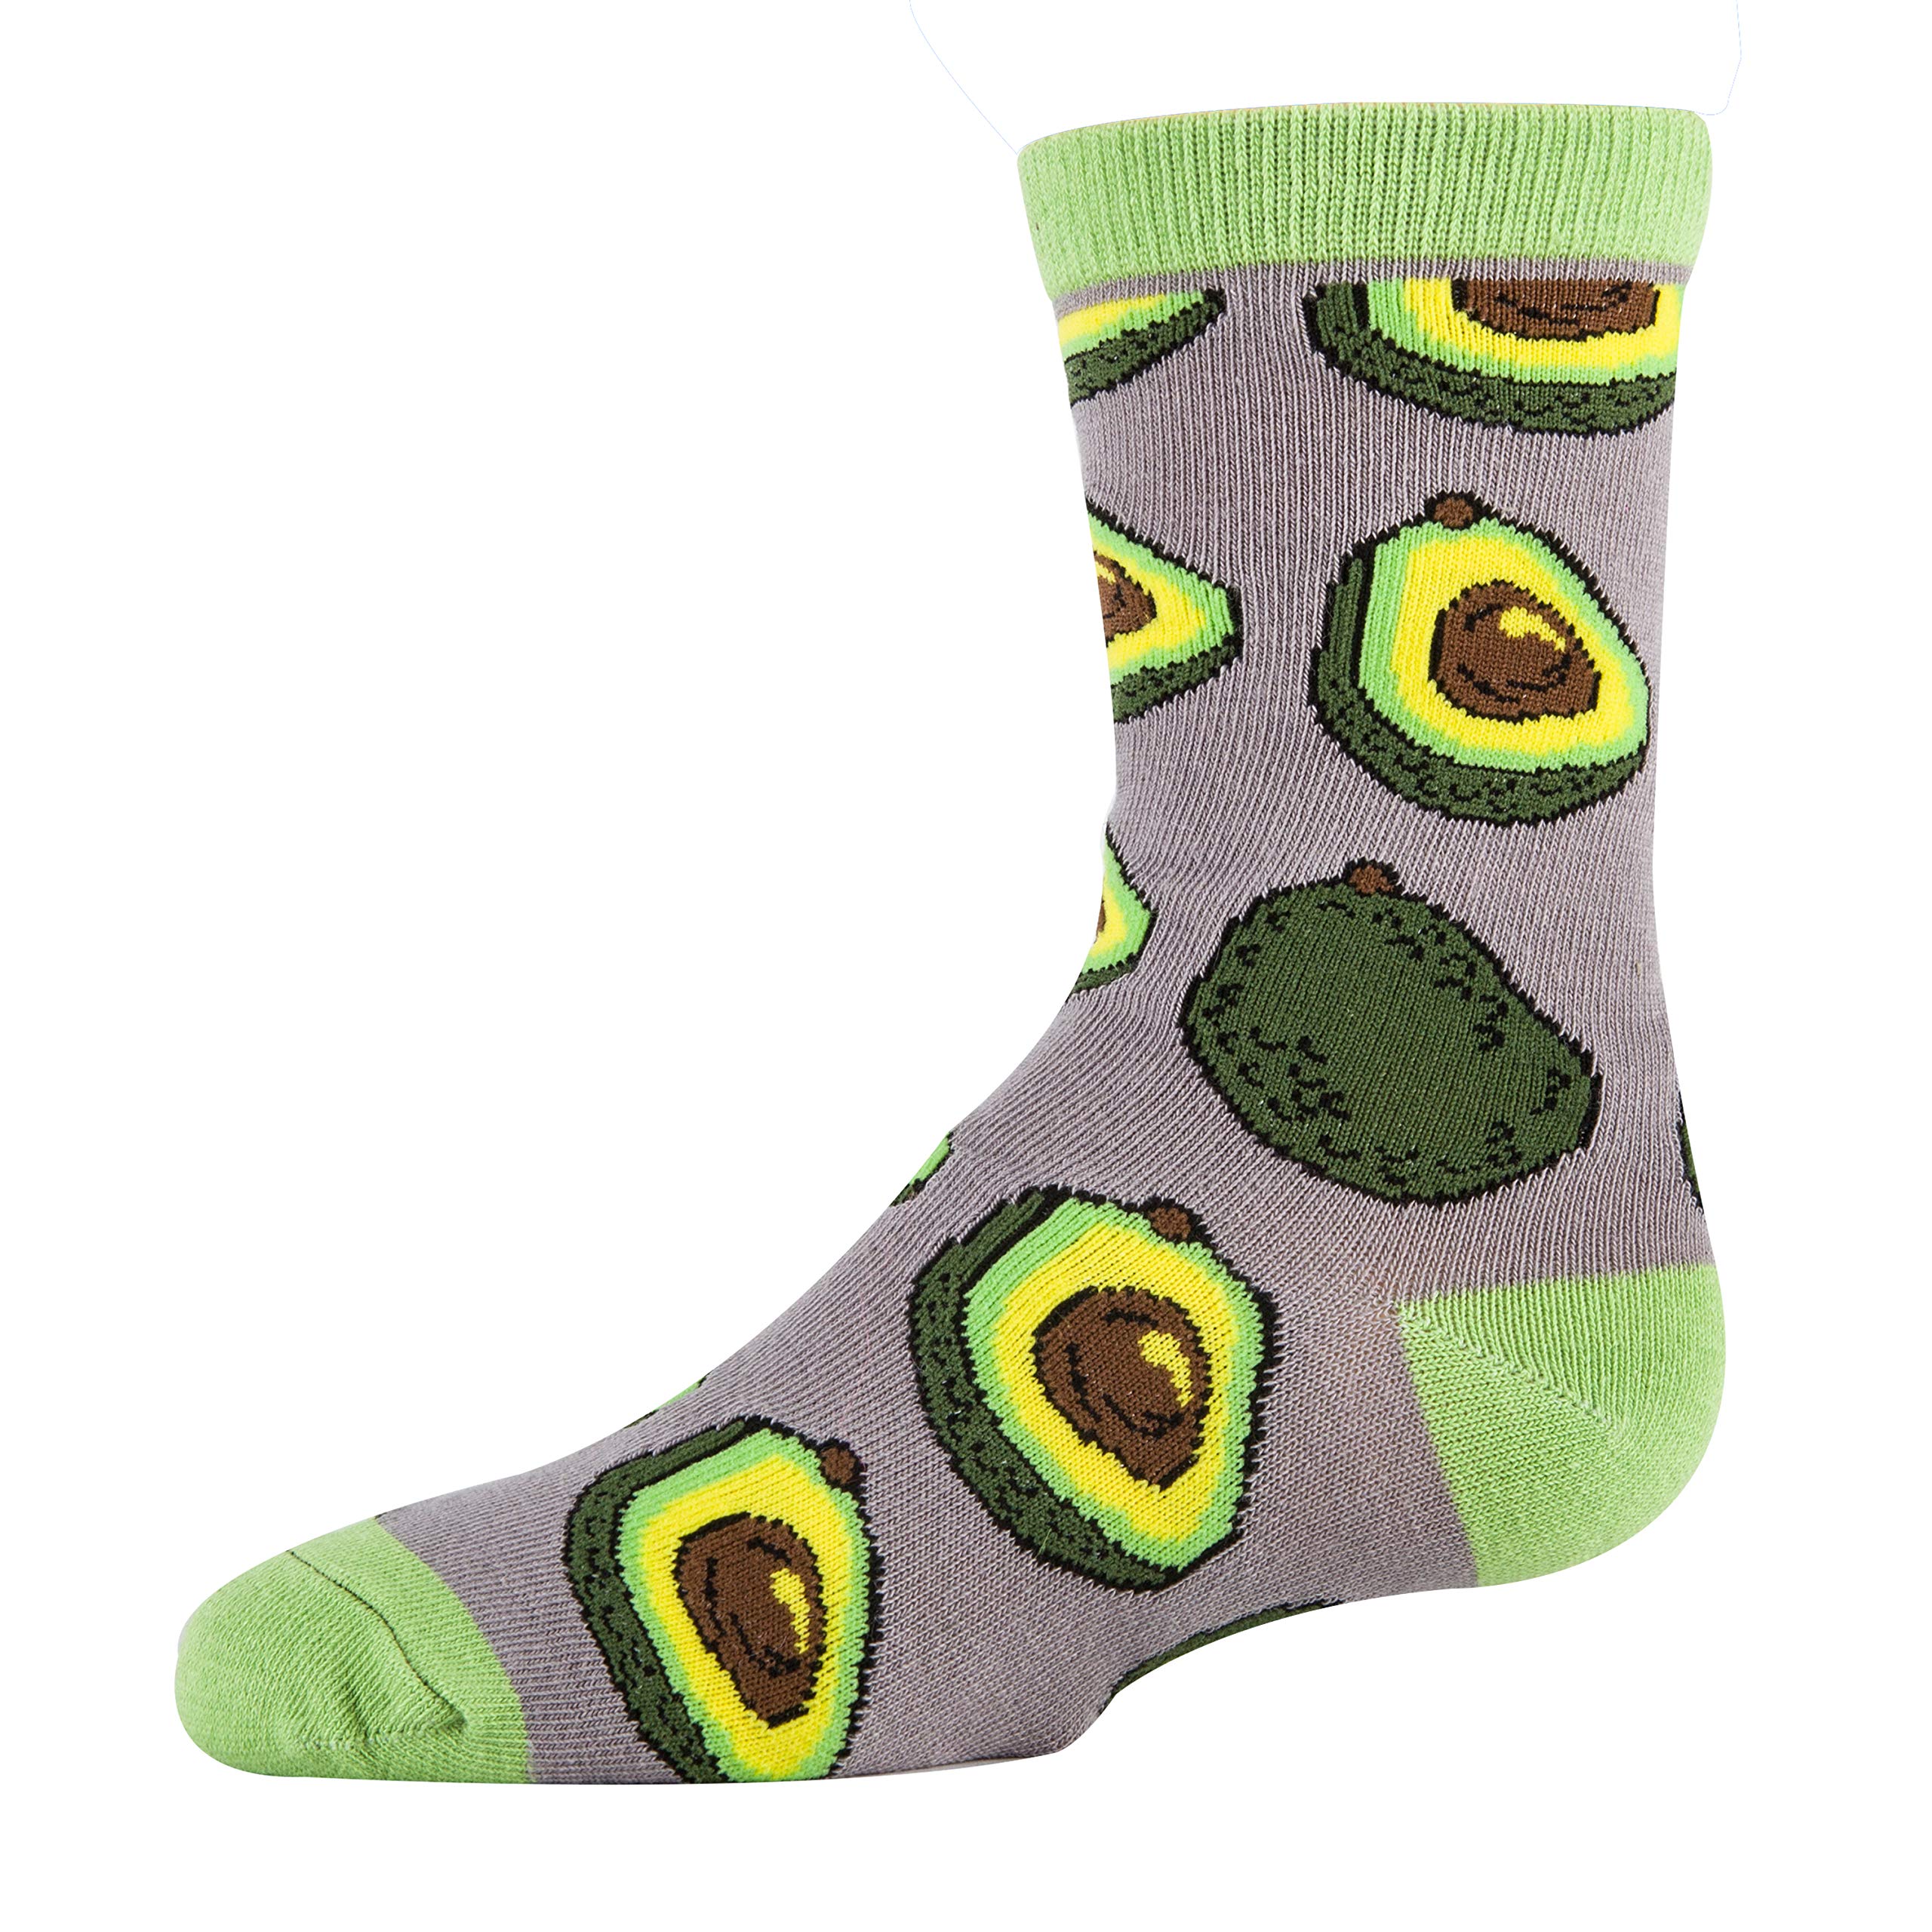 Oooh Yeah Kid's Novelty Crew Socks, Funny Crazy Silly Cool Casual Dress Socks for Boy and Girl